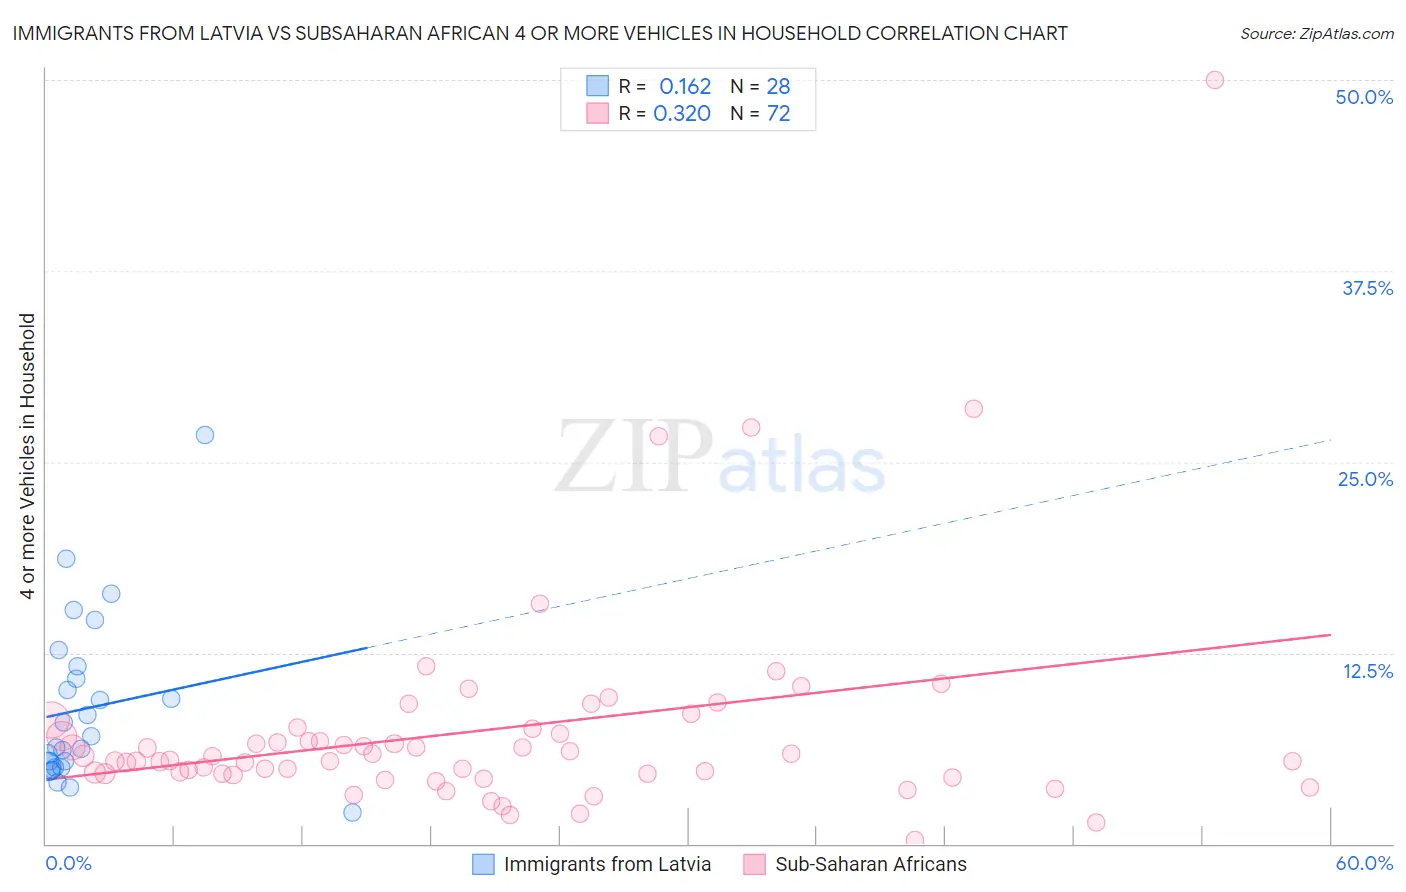 Immigrants from Latvia vs Subsaharan African 4 or more Vehicles in Household